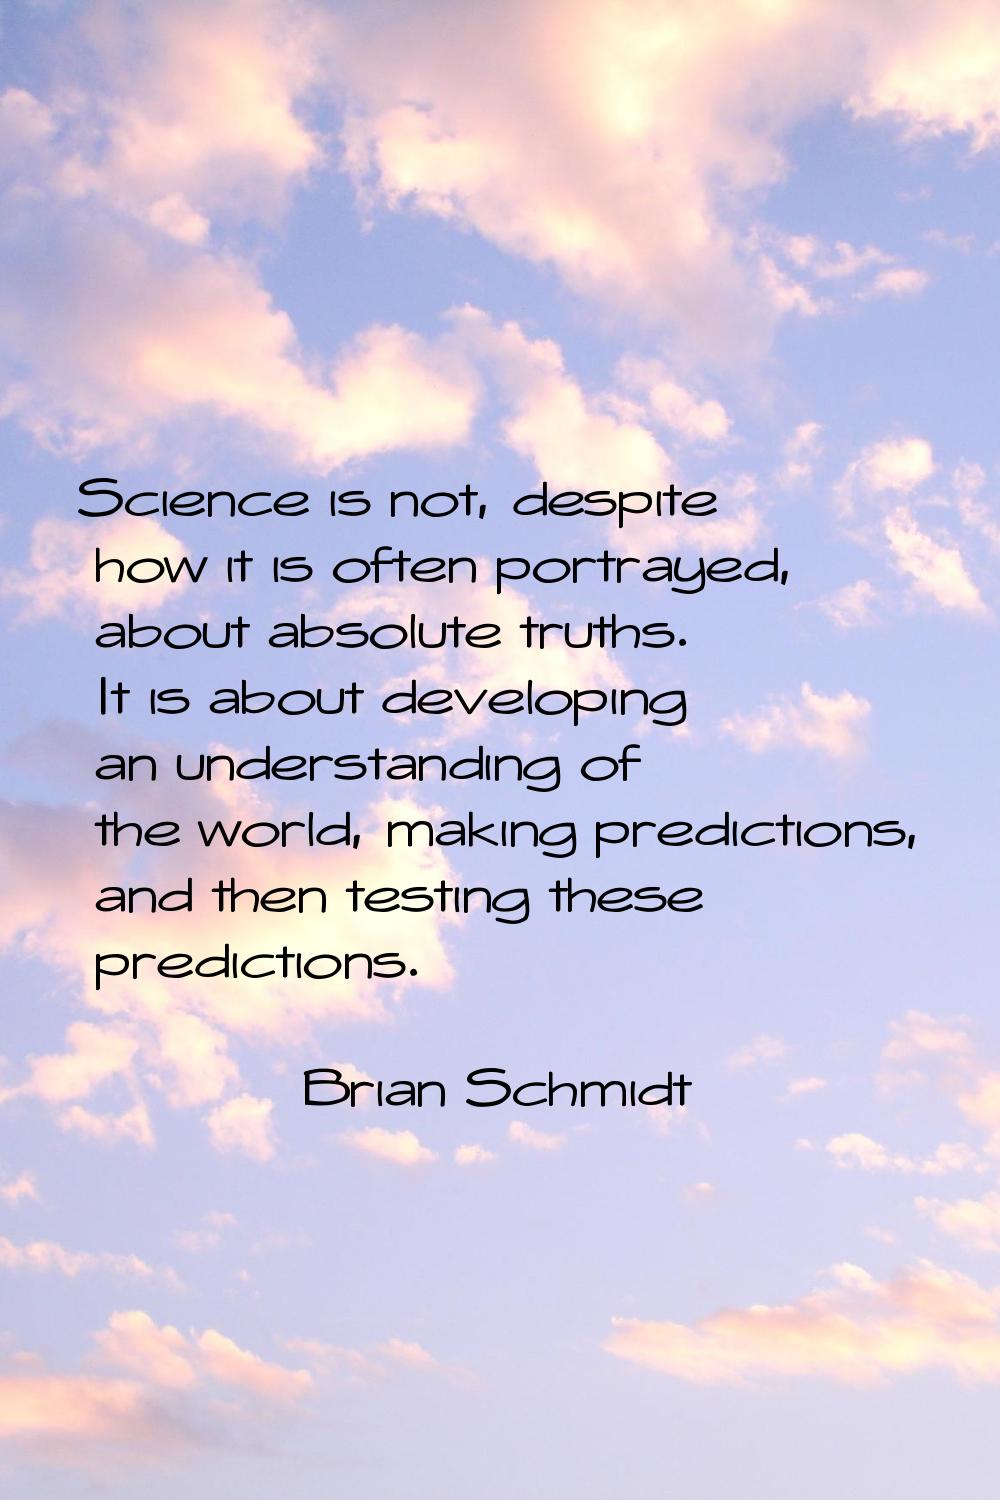 Science is not, despite how it is often portrayed, about absolute truths. It is about developing an